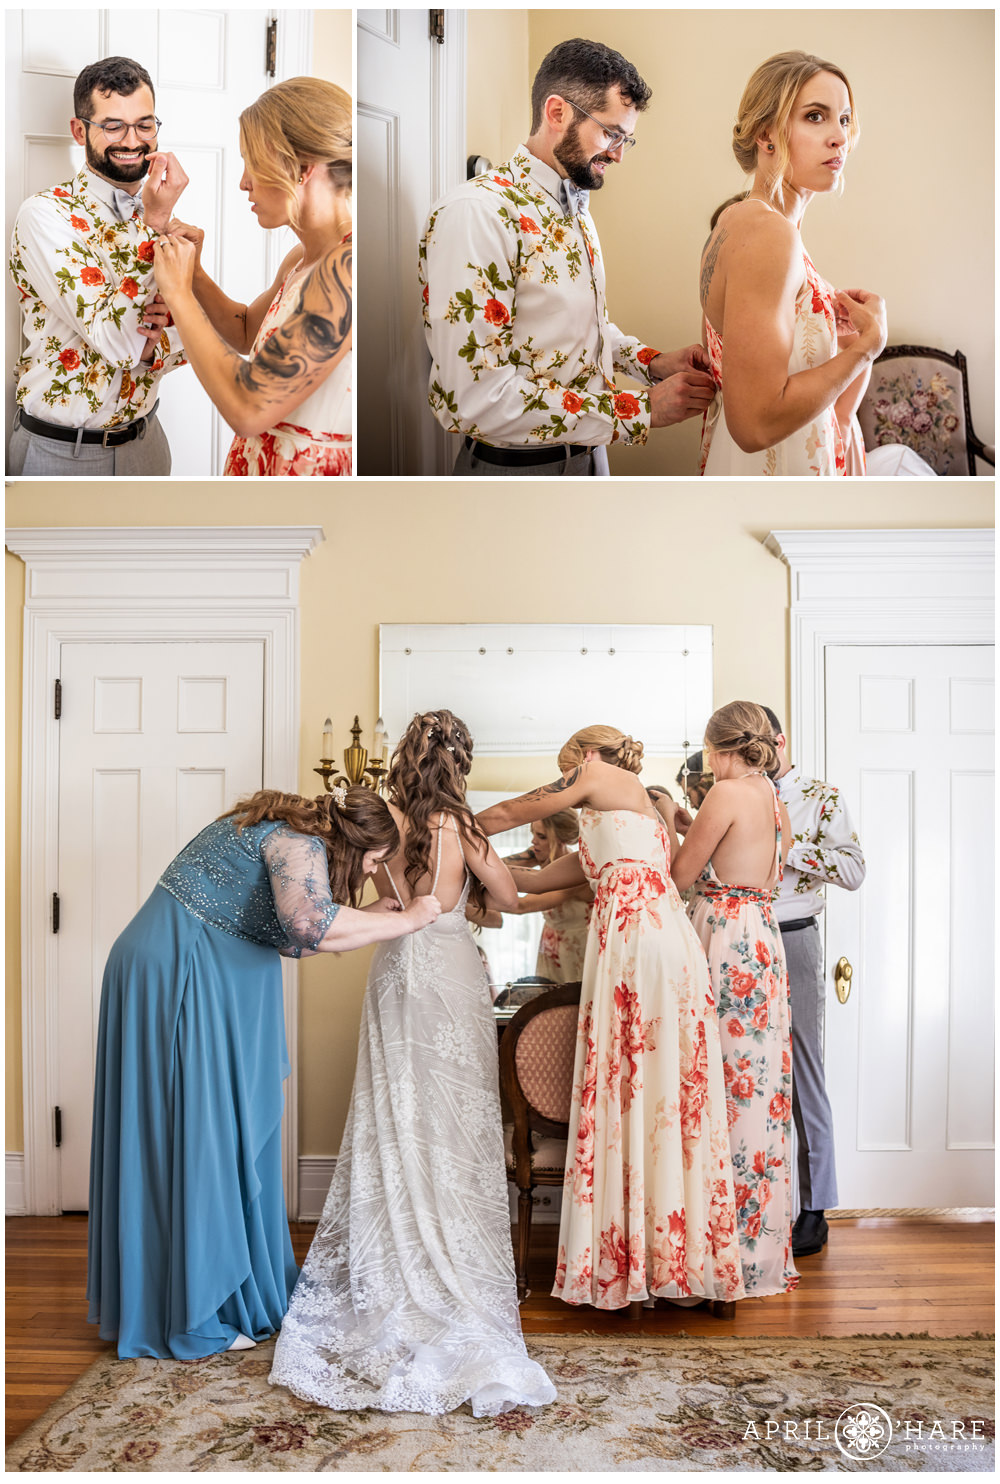 Bride getting ready in the bridal suite at Grant Humphreys Mansion in Denver